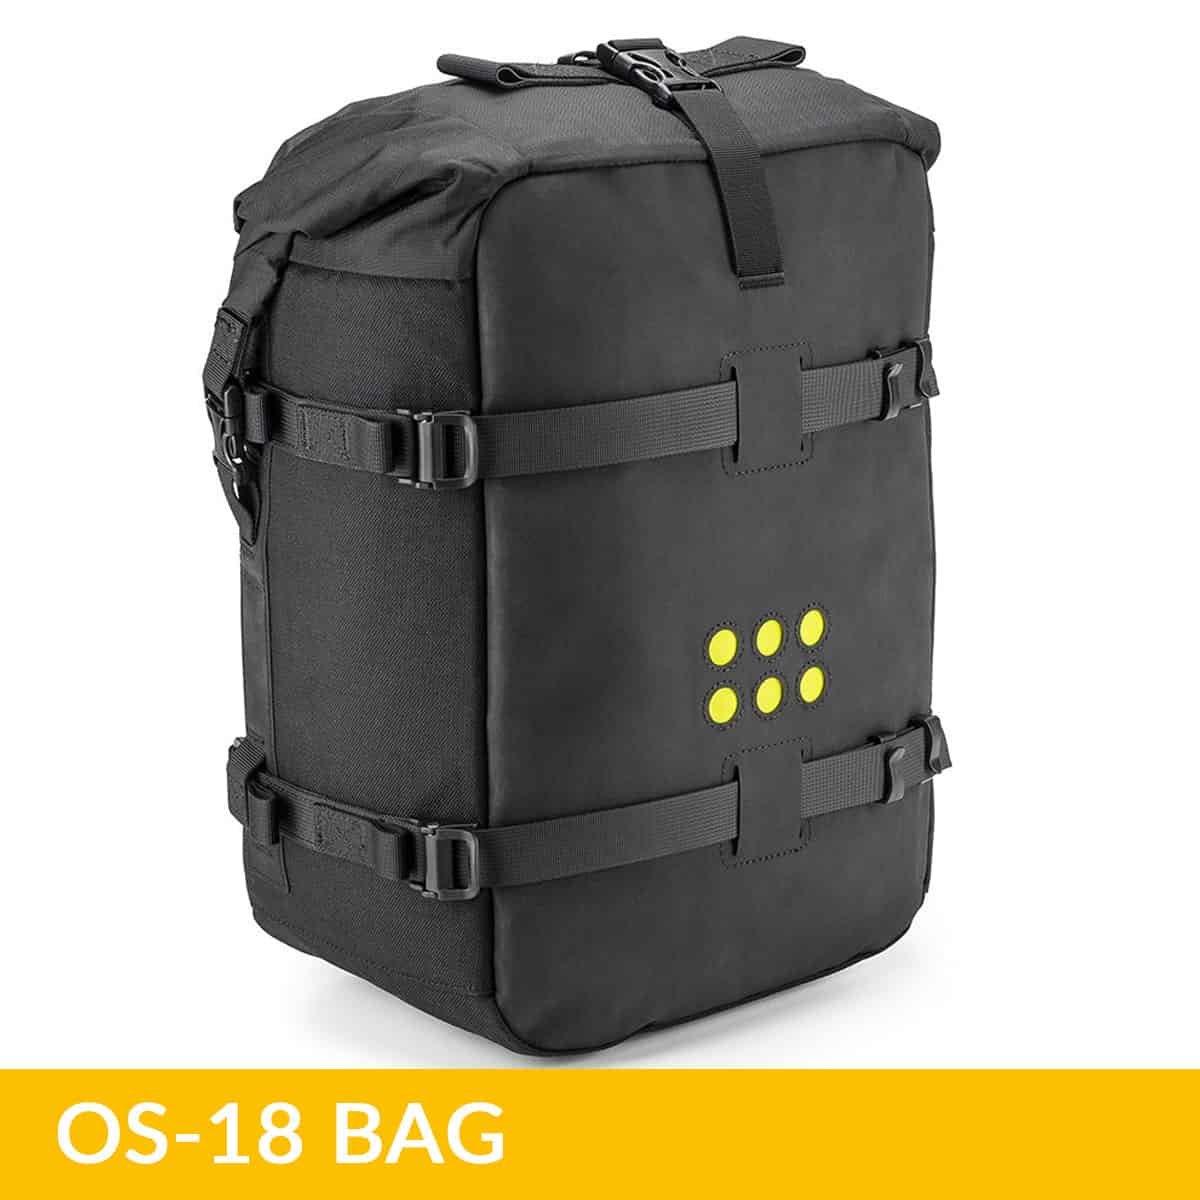 Kriega Overlander-S OS Packs: Serious luggage for serious adventures 18L Front